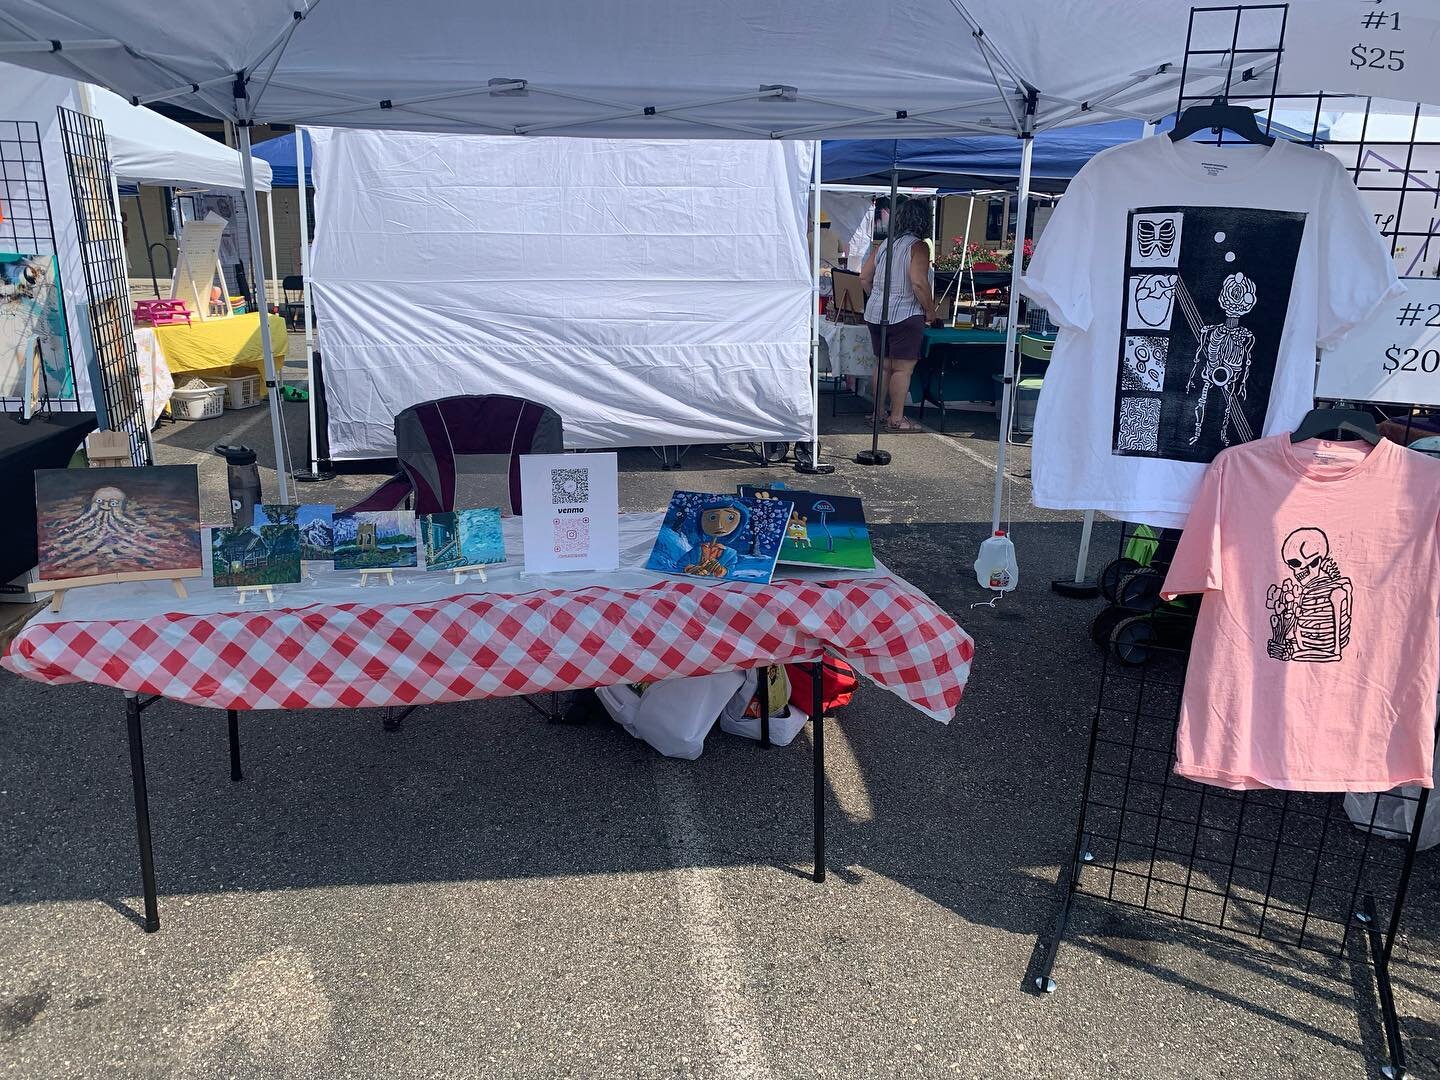 All set up at Markets on Michigan 🤠 Shes held together with packing tape and a dream but we got it